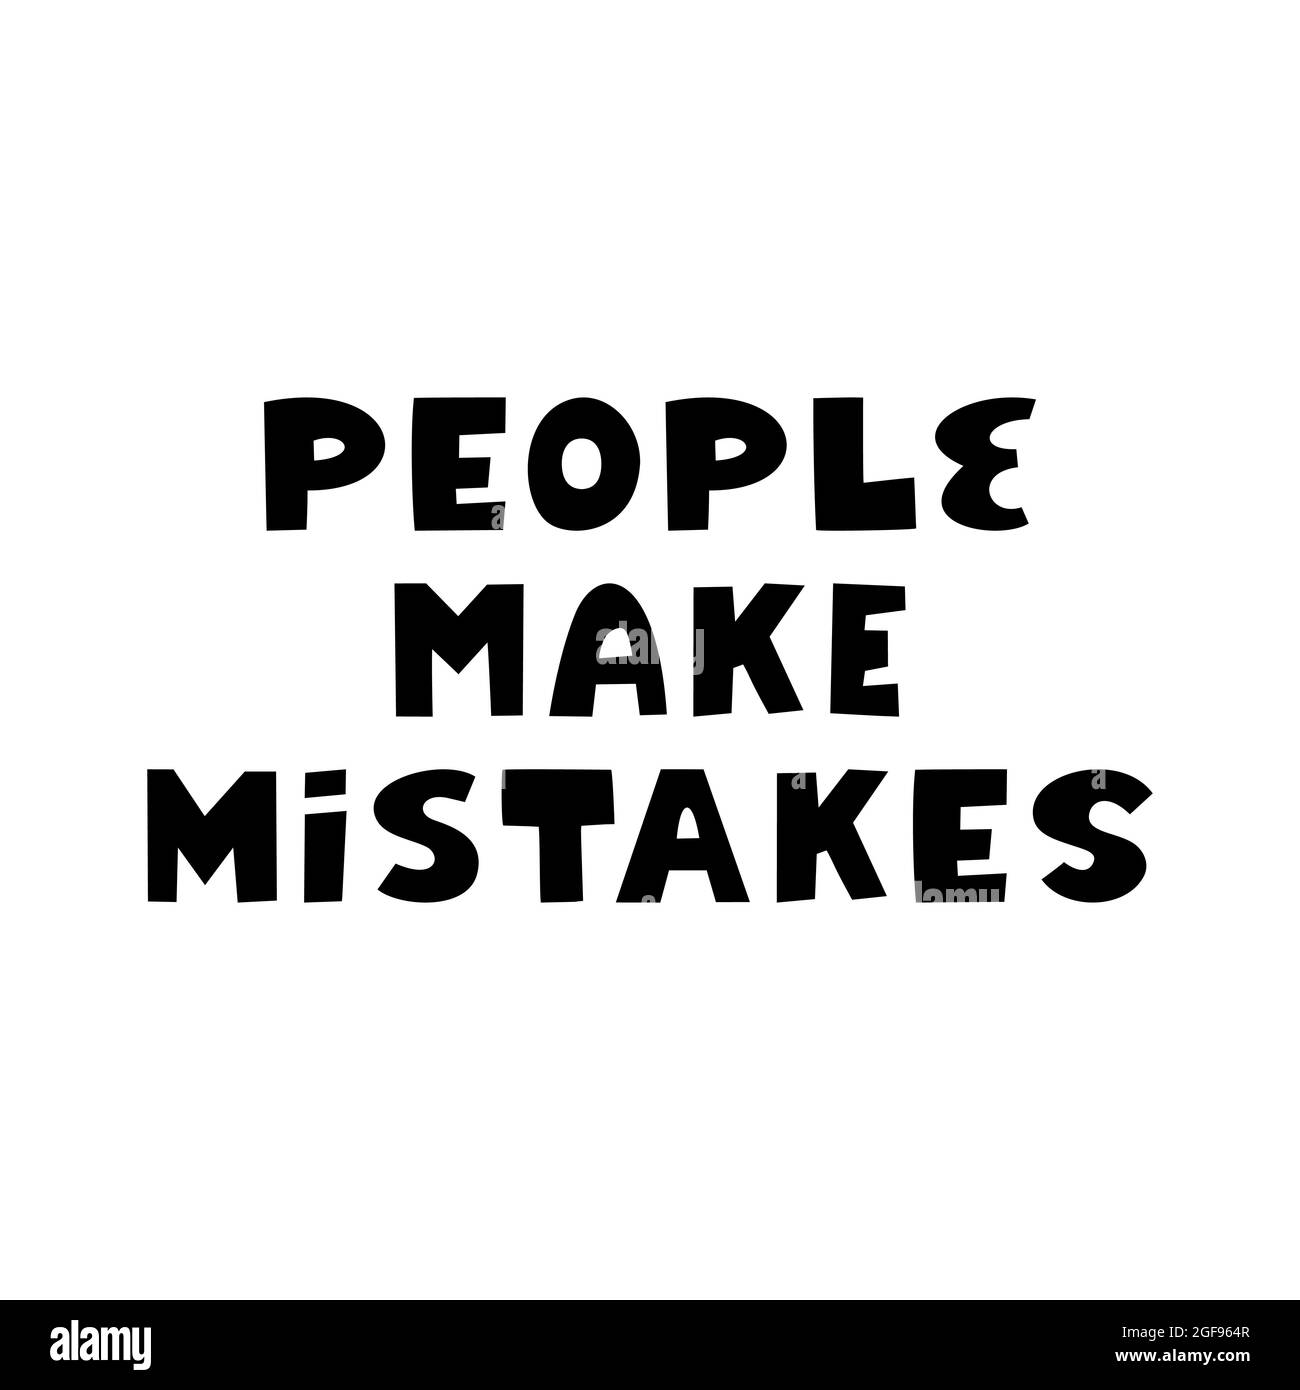 People make mistakes. Philosophical quote. Cute hand drawn lettering in modern scandinavian style. Isolated on white background. Vector stock Stock Vector